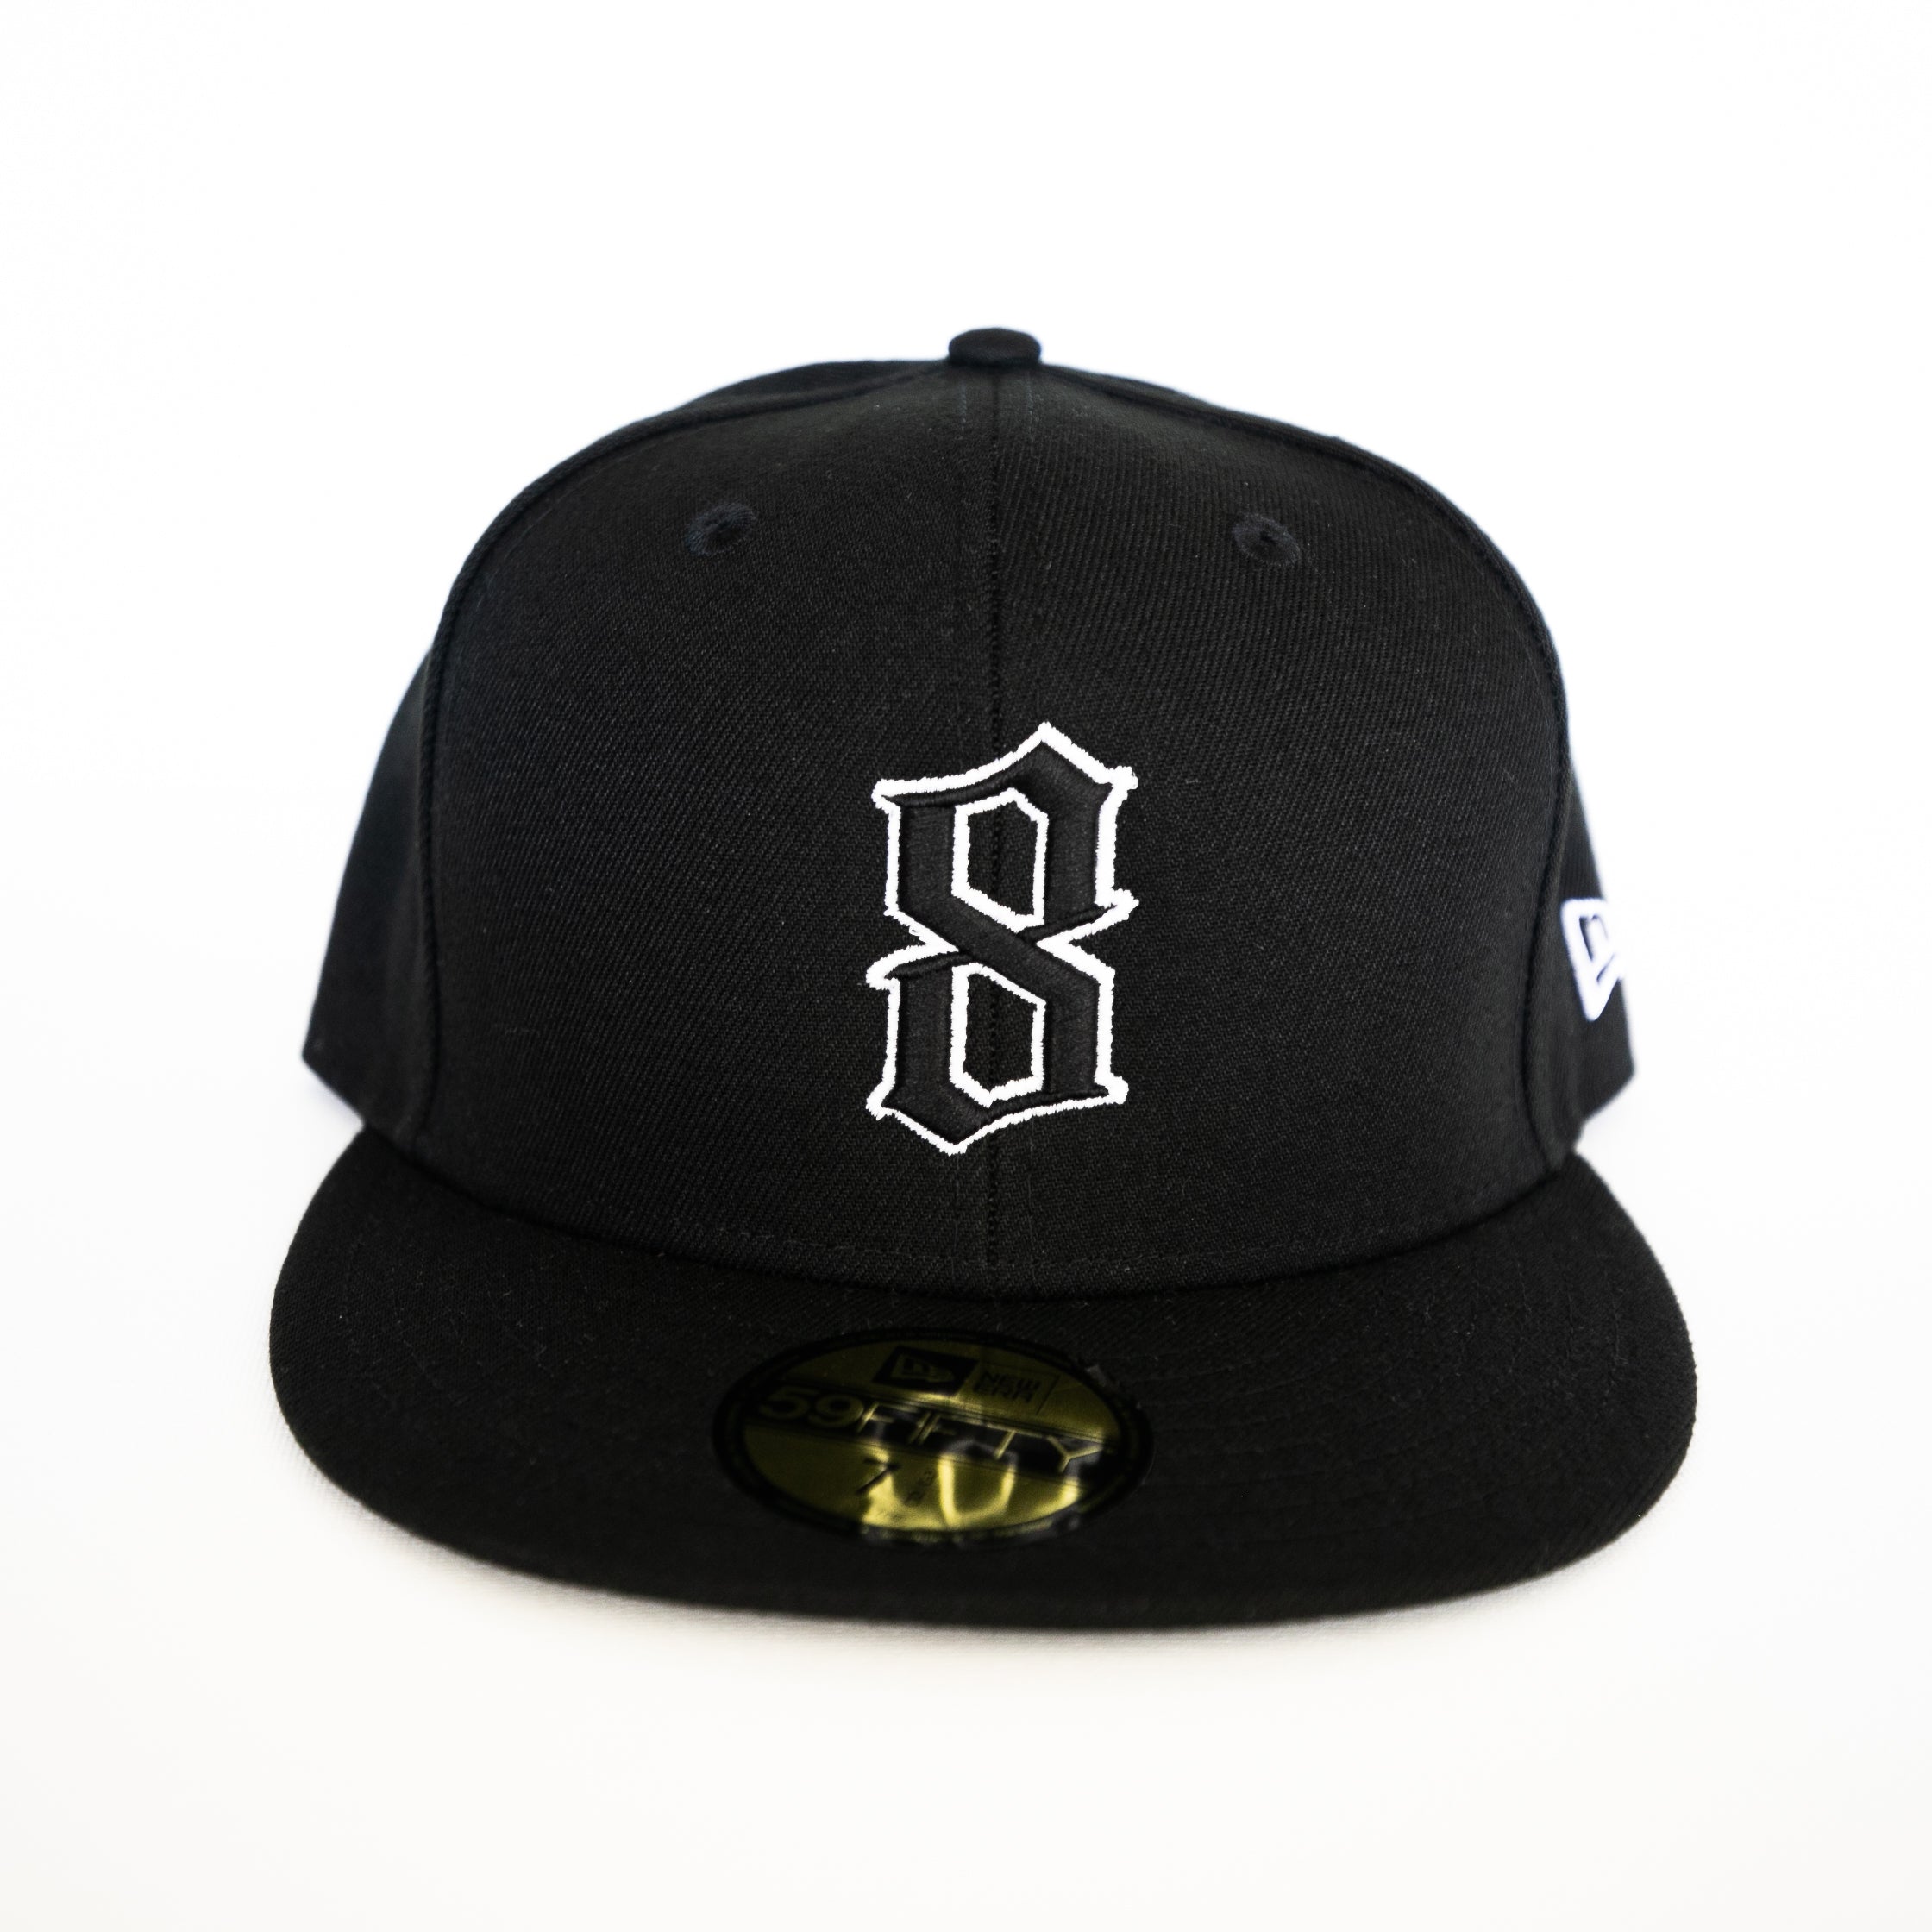 MDG EIGHTH COLLECTION NEW ERA 59FIFTY FITTED 8 CAP - 2 TONE BLACK/WHITE